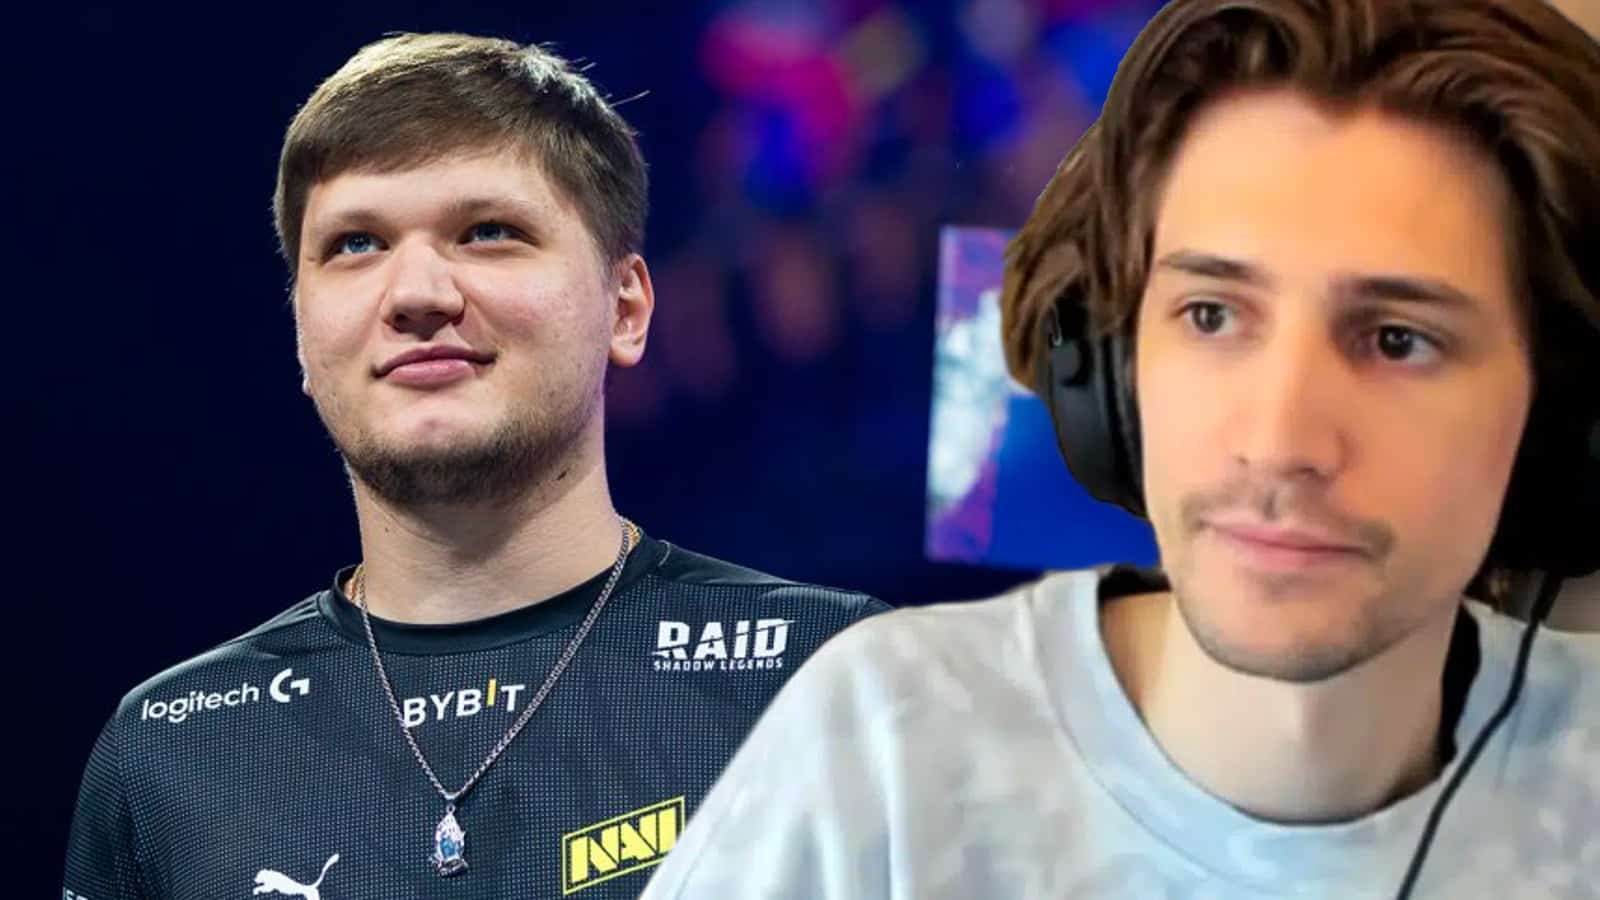 xQc and s1mple